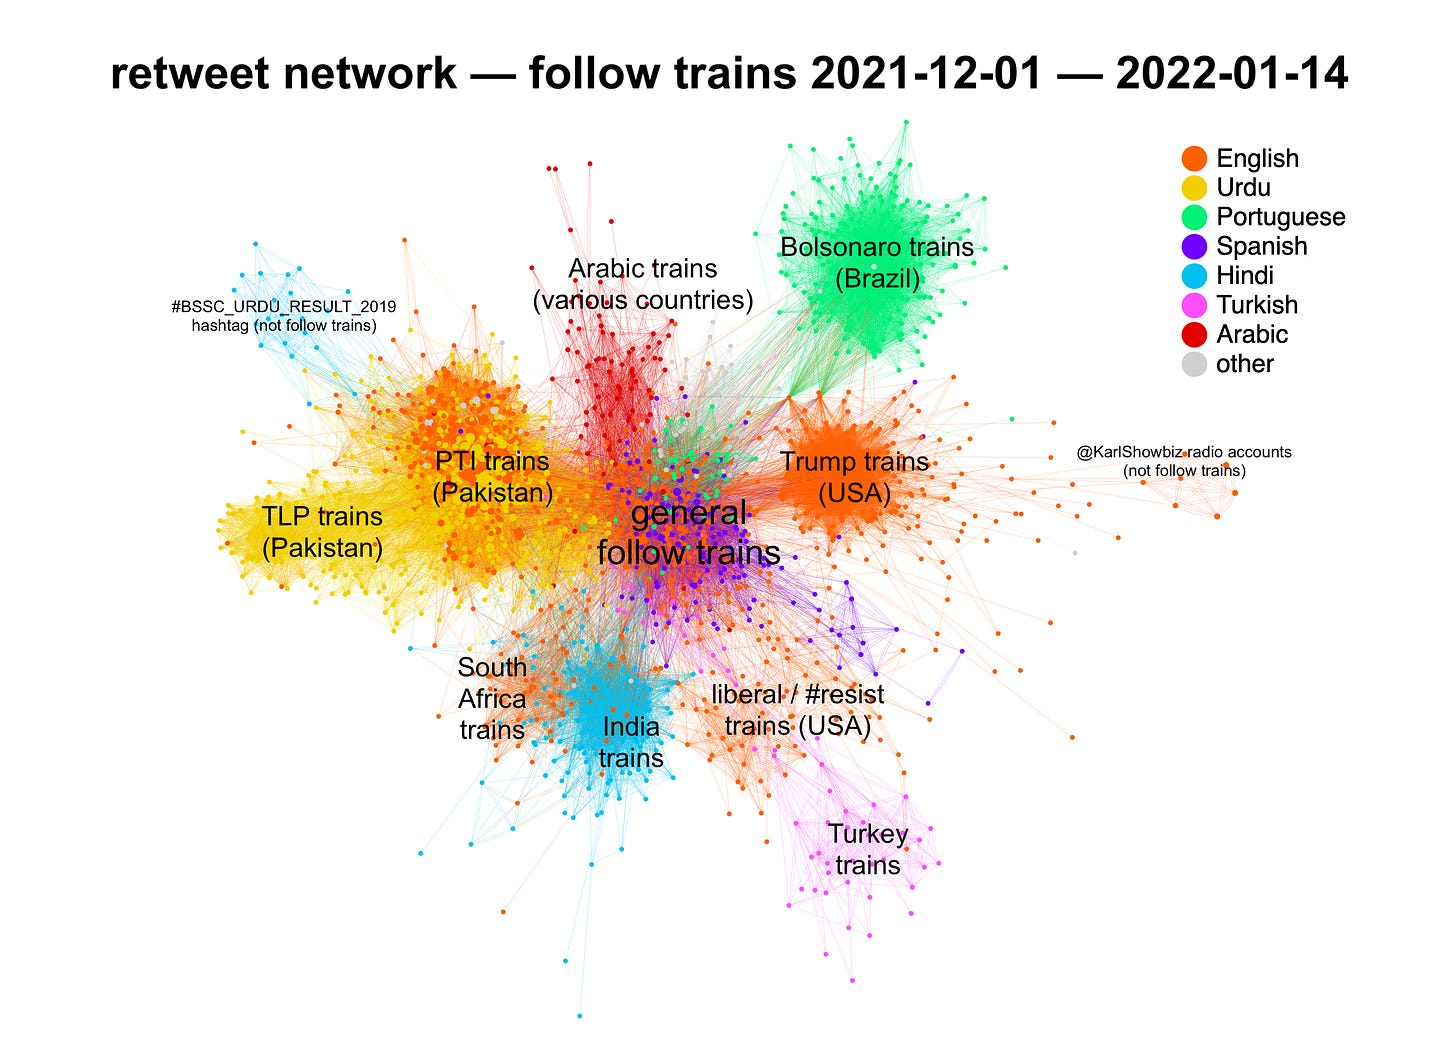 retweet network diagram for various types of follow trains